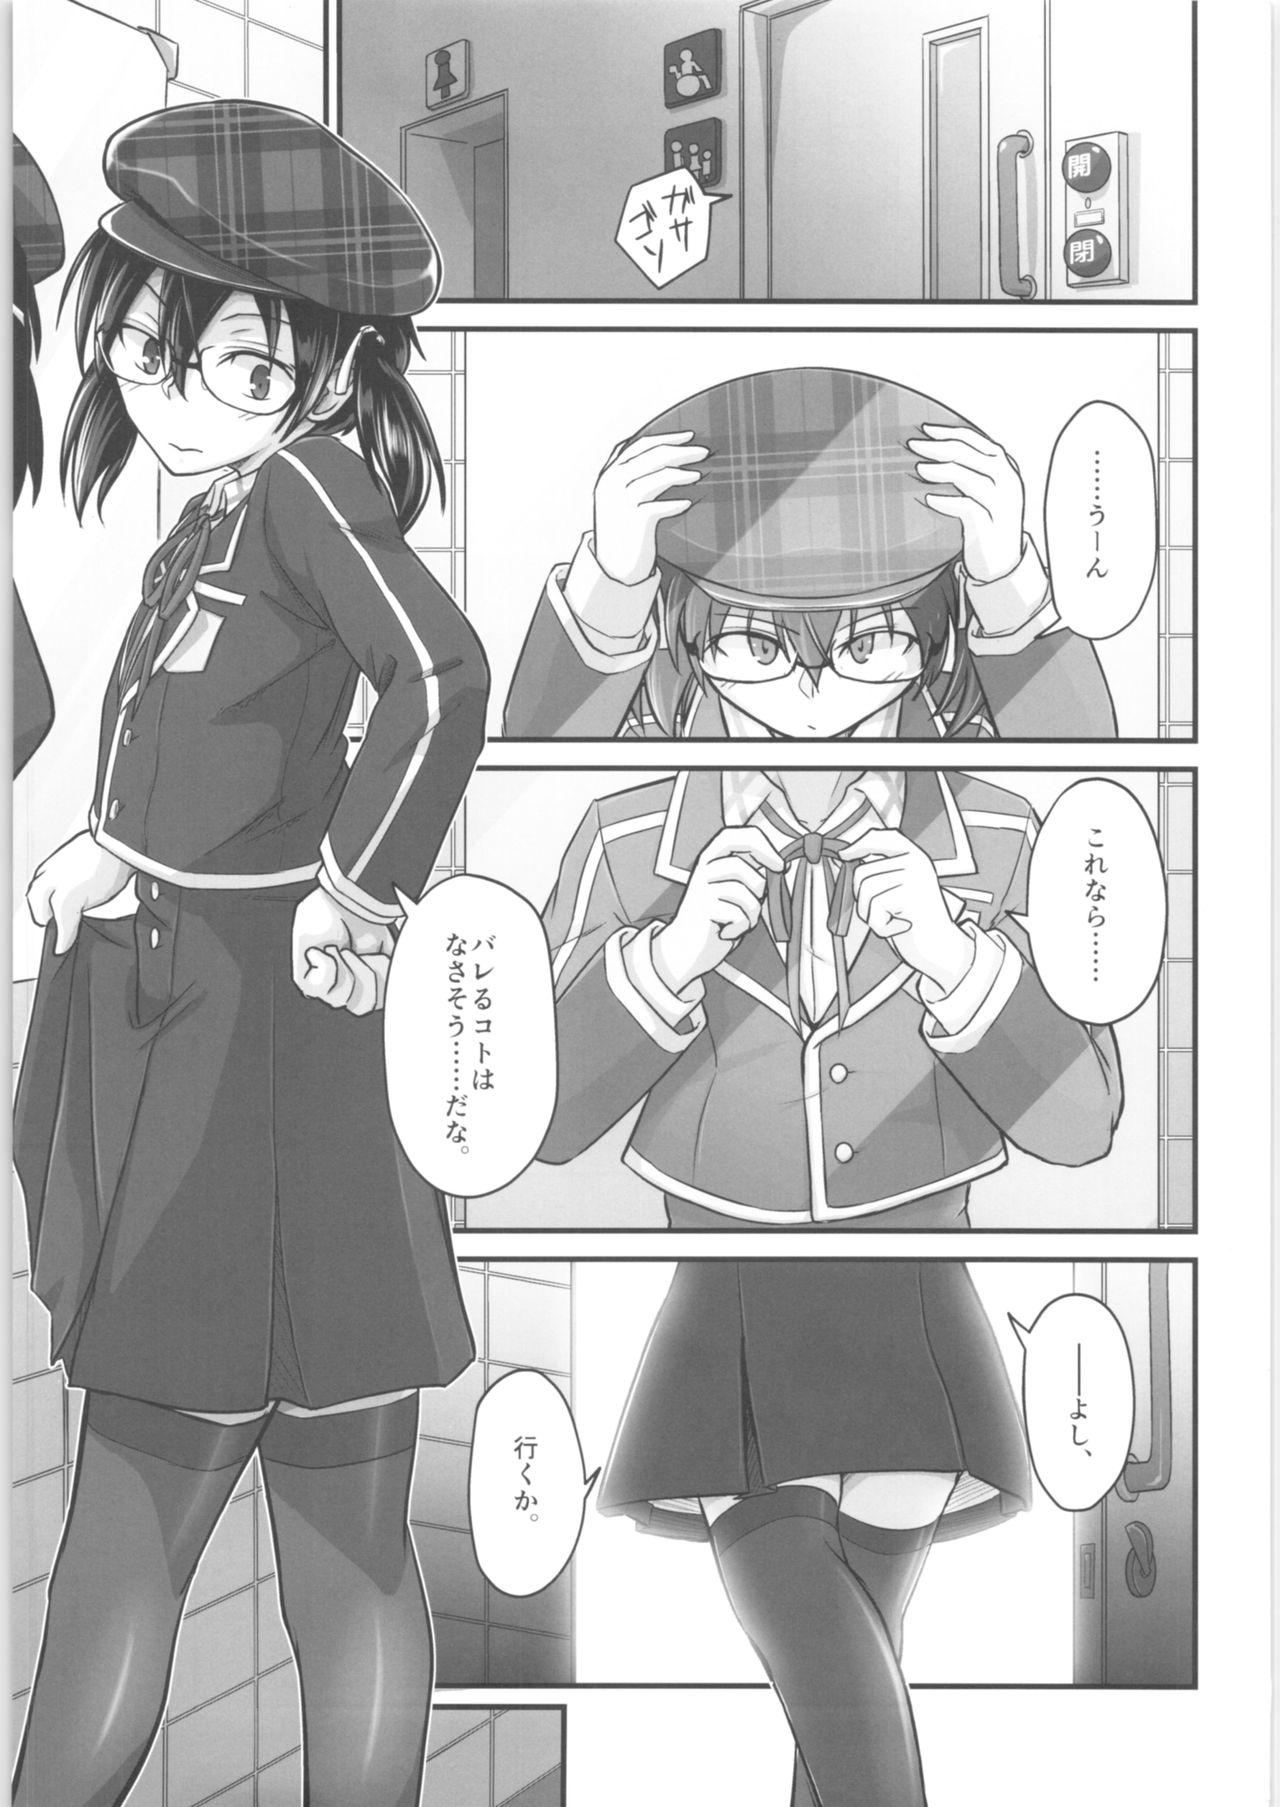 Cutie Kiriko Route Another #05 - Sword art online Sexy - Page 2